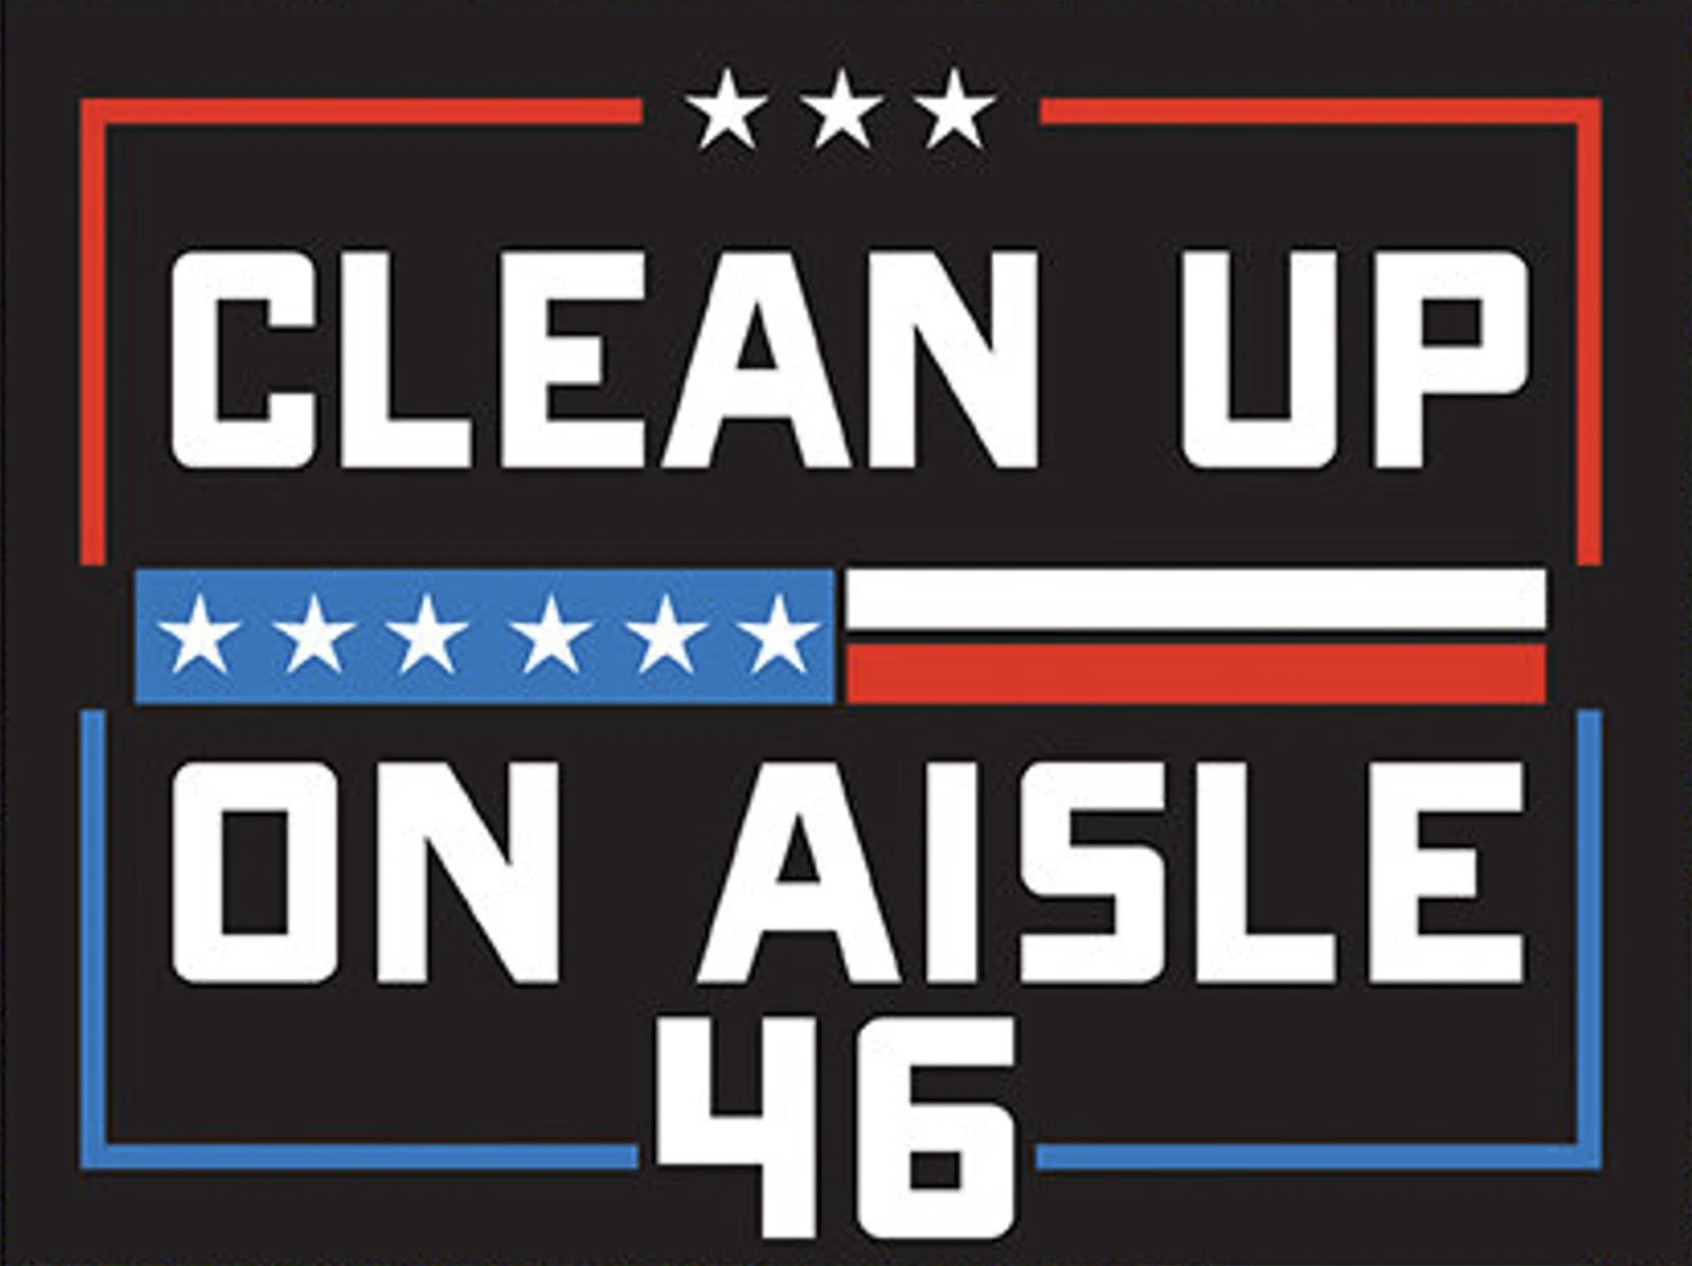 Clean up on Aisle 46 Yard signs